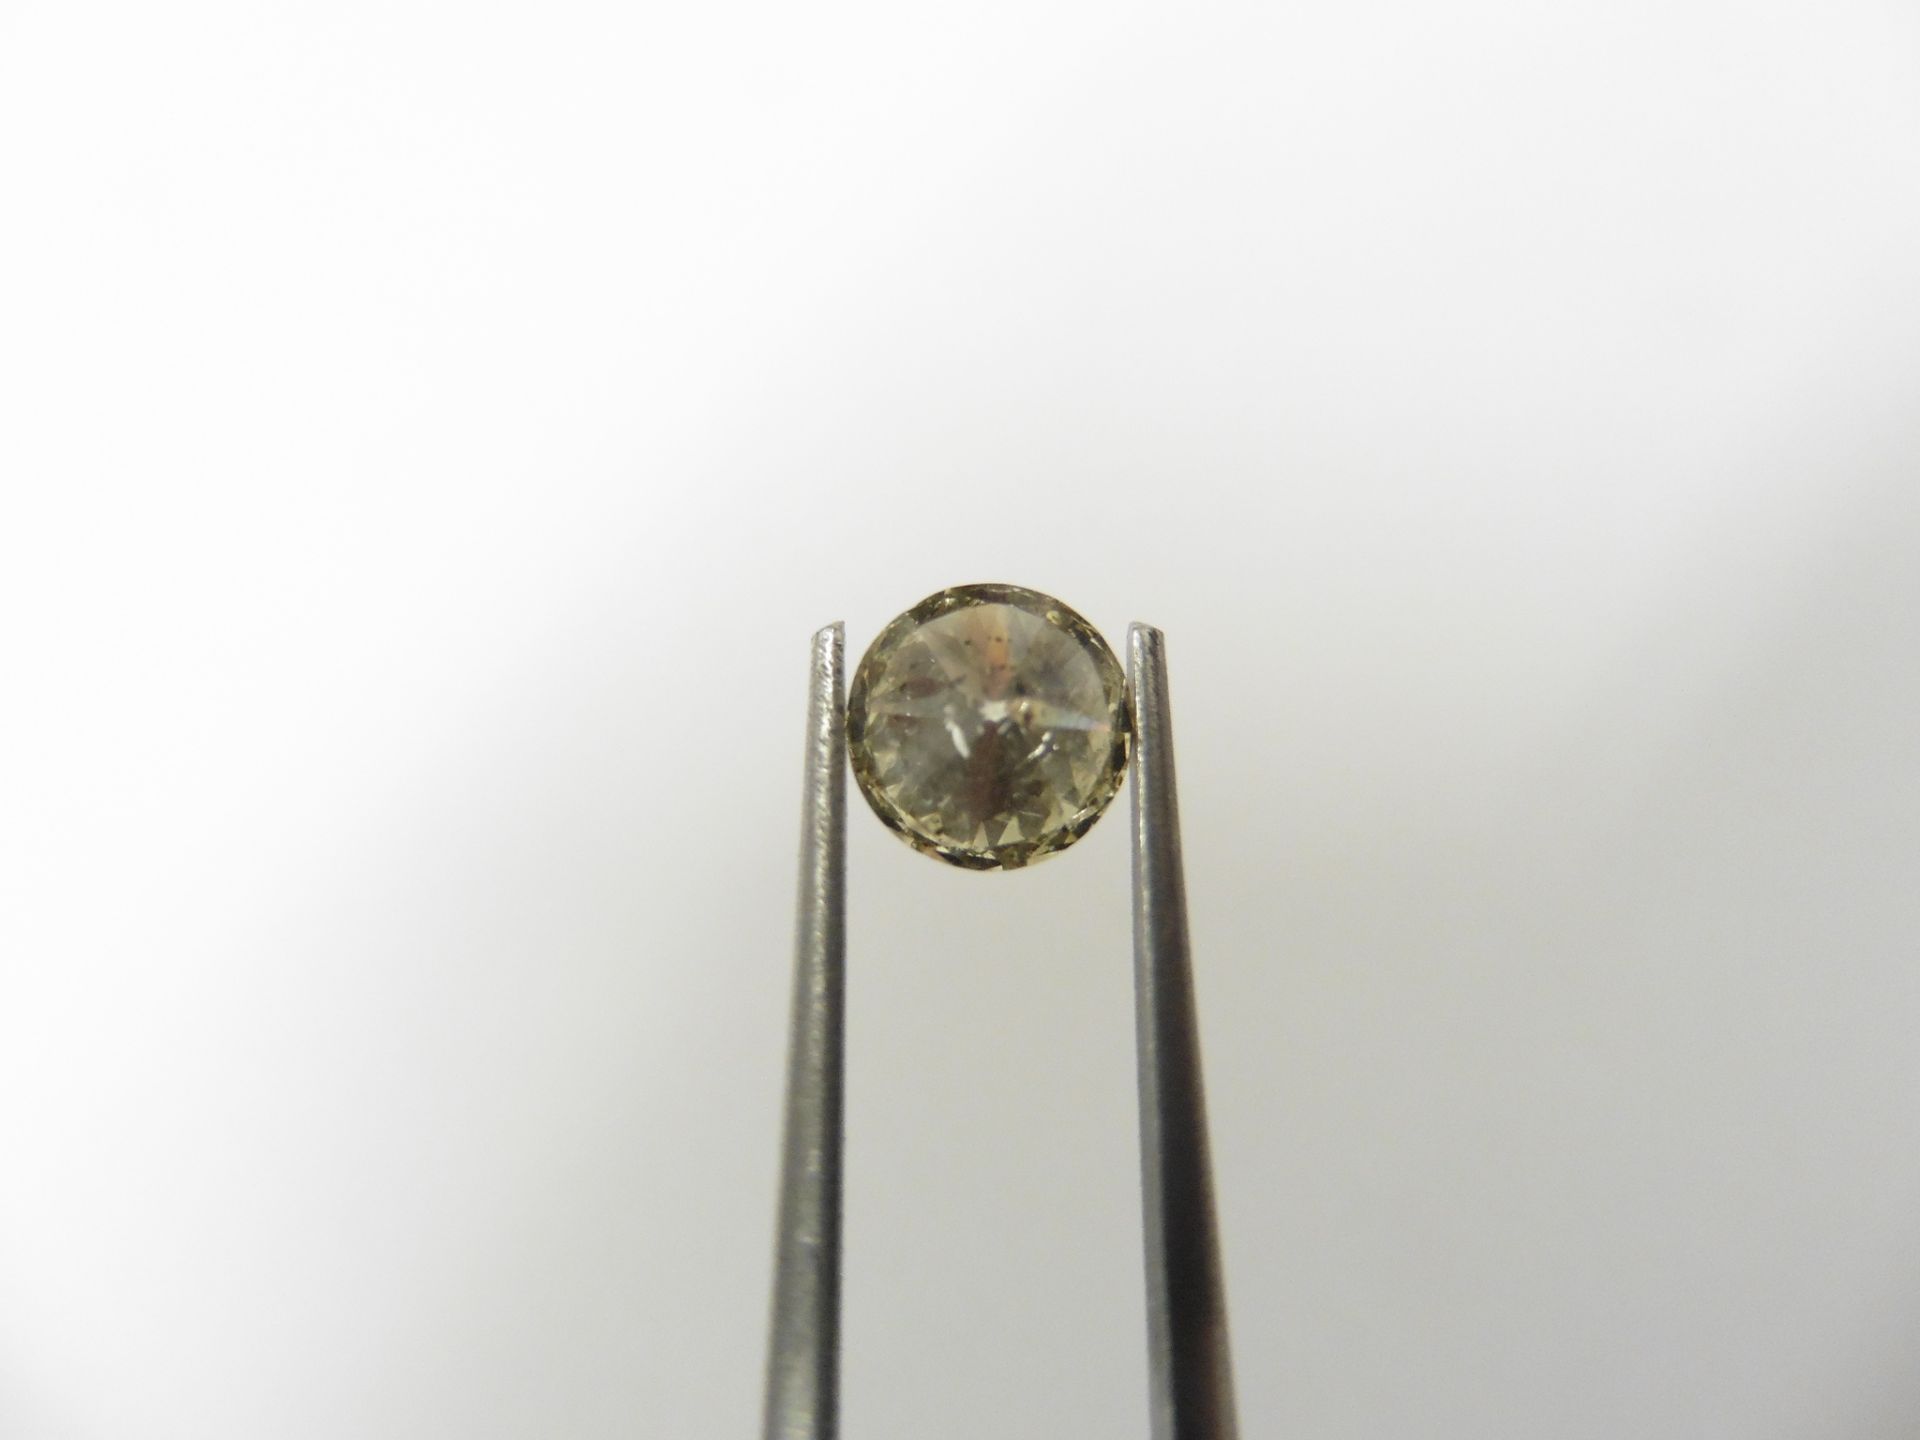 1.27ct natural loose brilliant cut diamond. K colour and I1 clarity. No certification but can be - Bild 2 aus 4